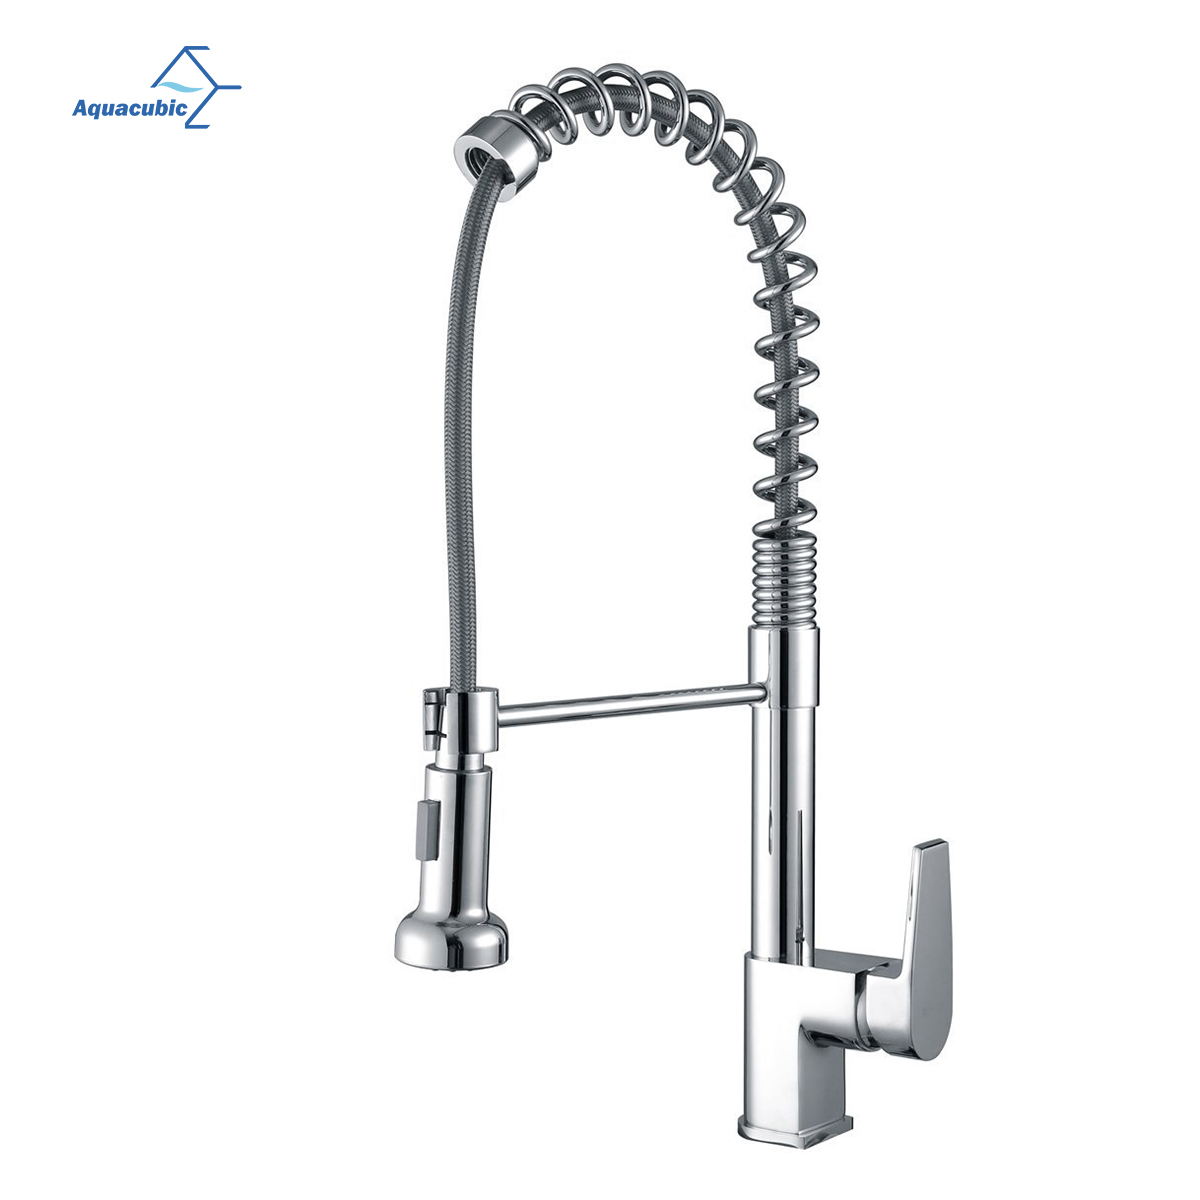  Aquacubic low lead cUPC Sanitary Contemporary Universal Pull Out Kitchen Faucet